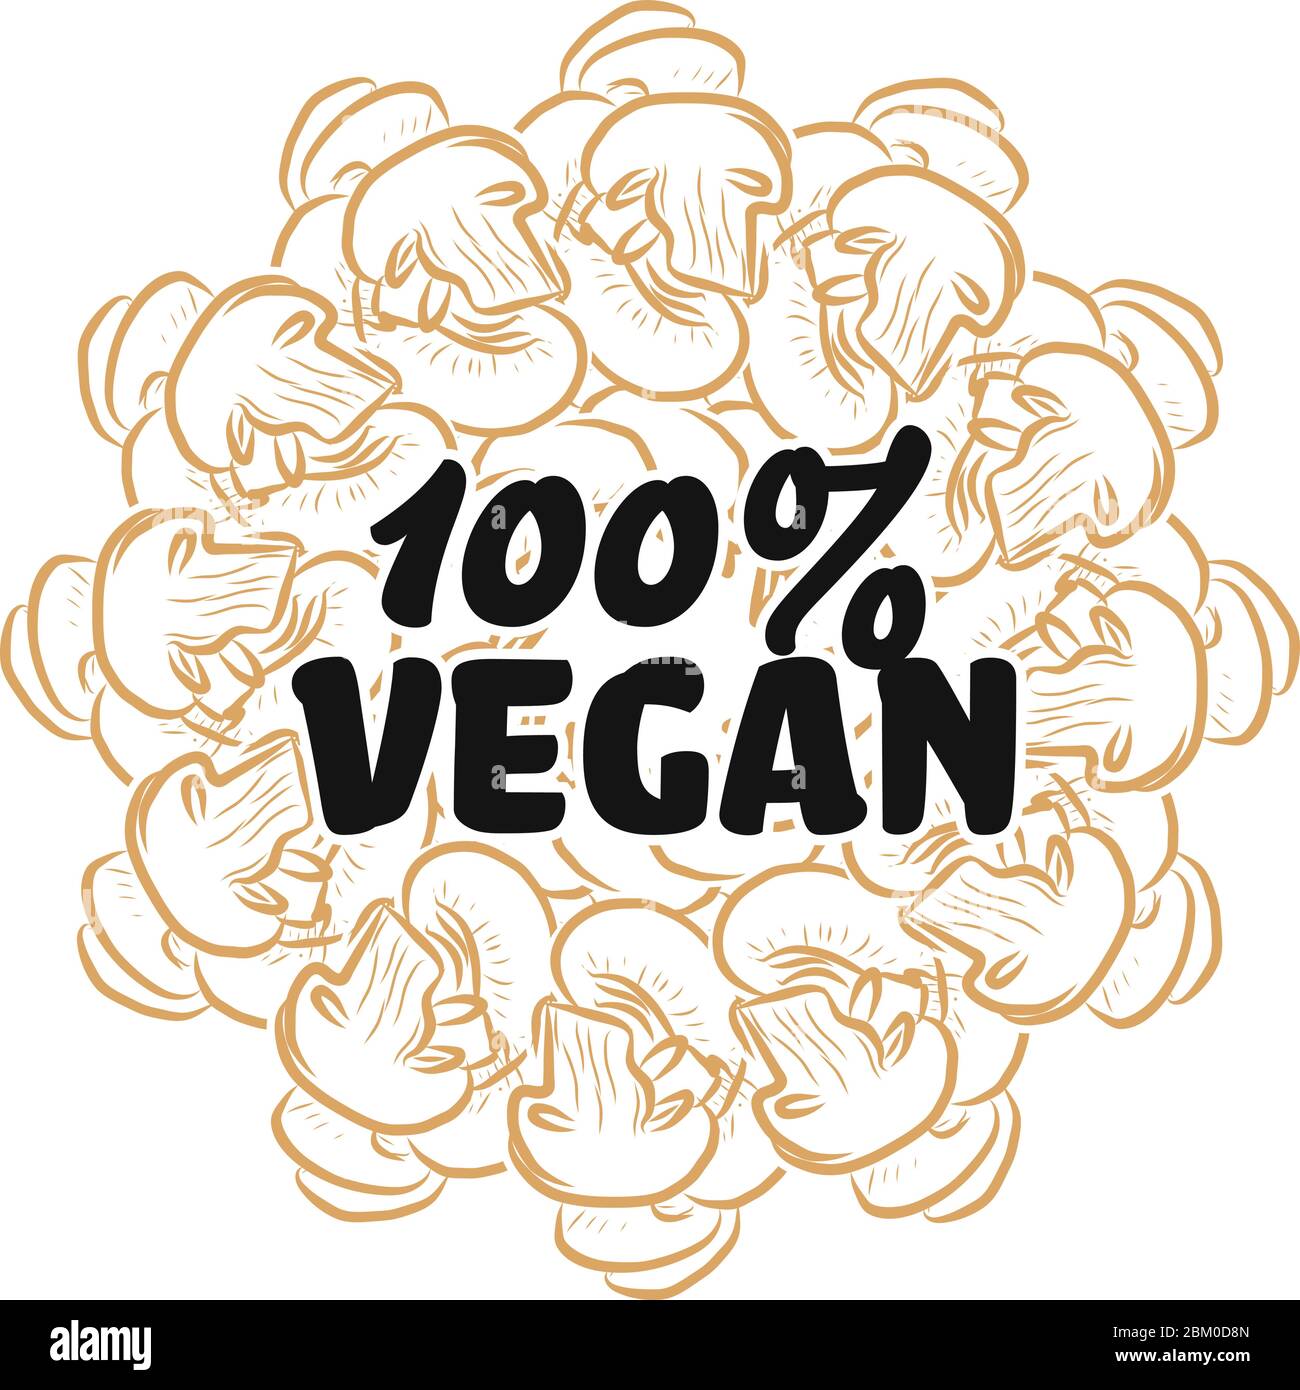 100% vegan sign on background of Mushrooms. Round composition with hand-drawn veggies for art prints. Stock Vector